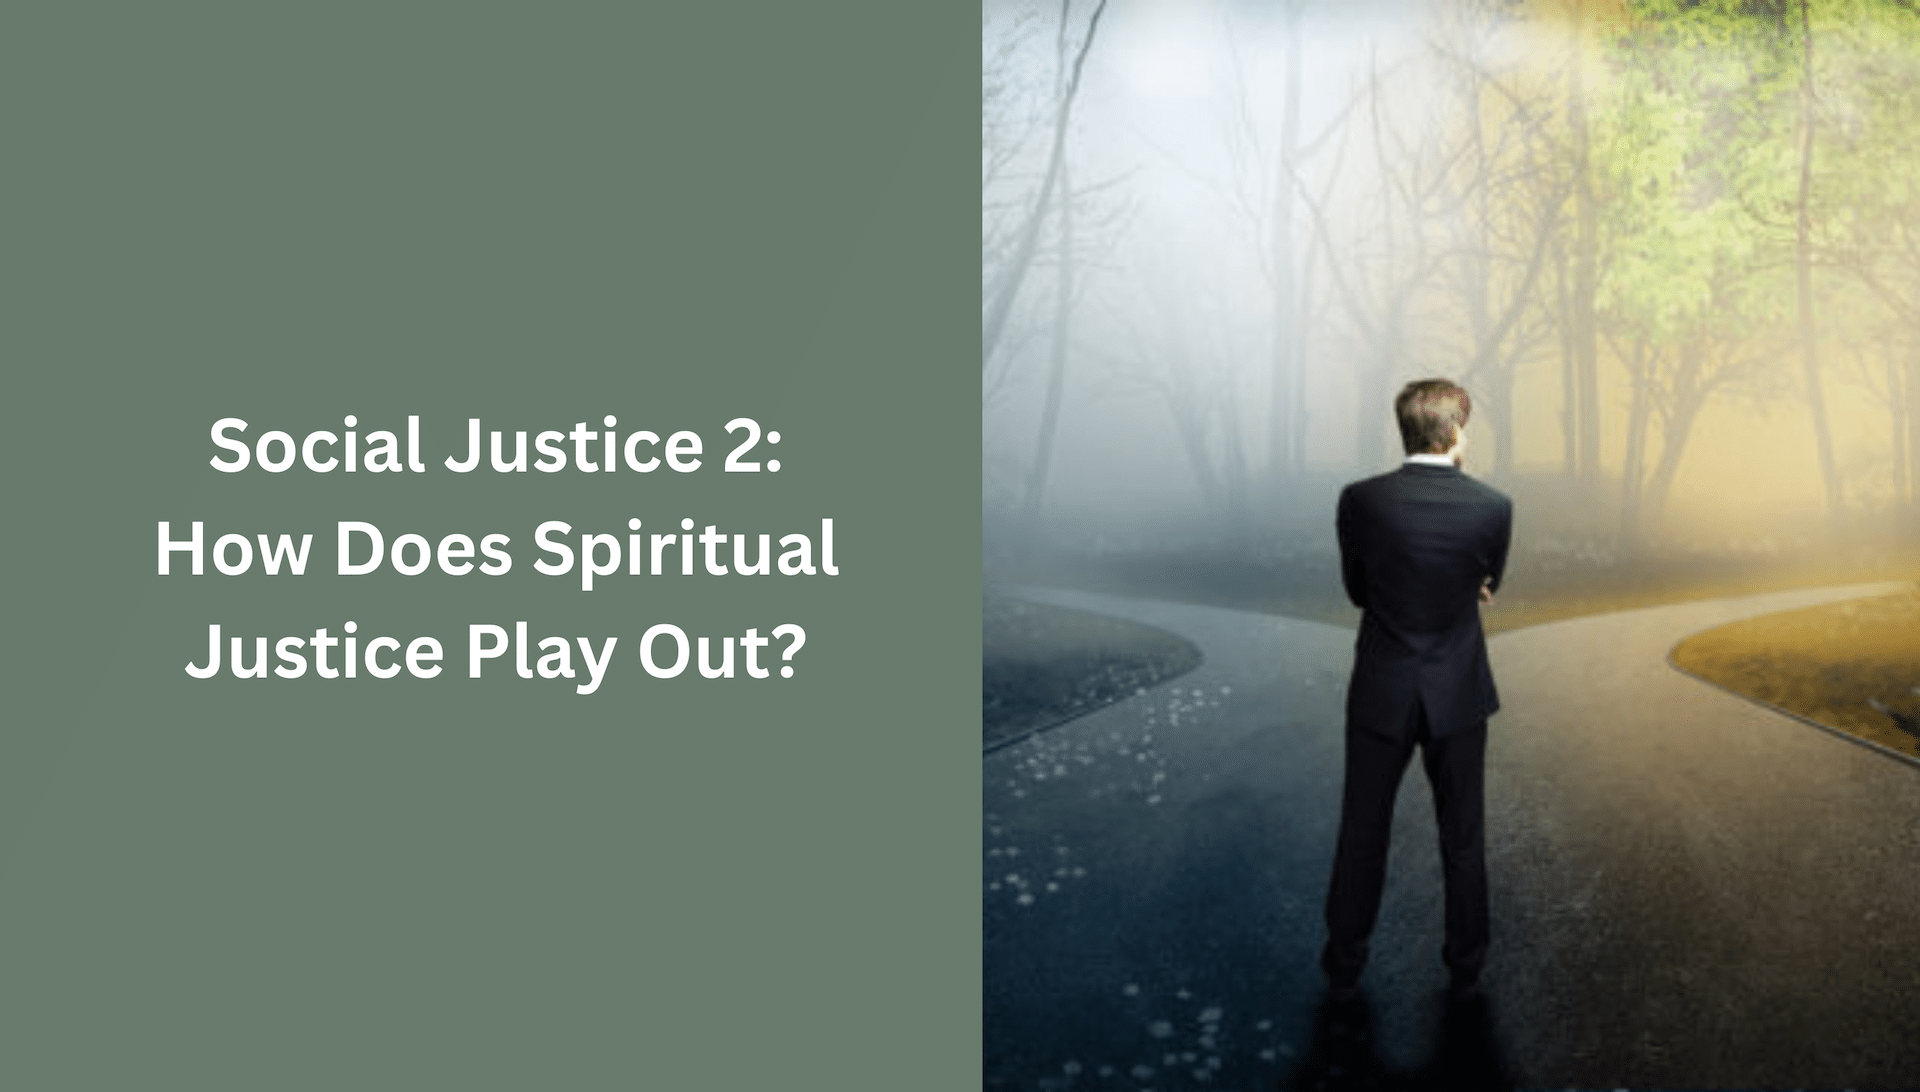 Social justice 2: How does spiritual justice play out?